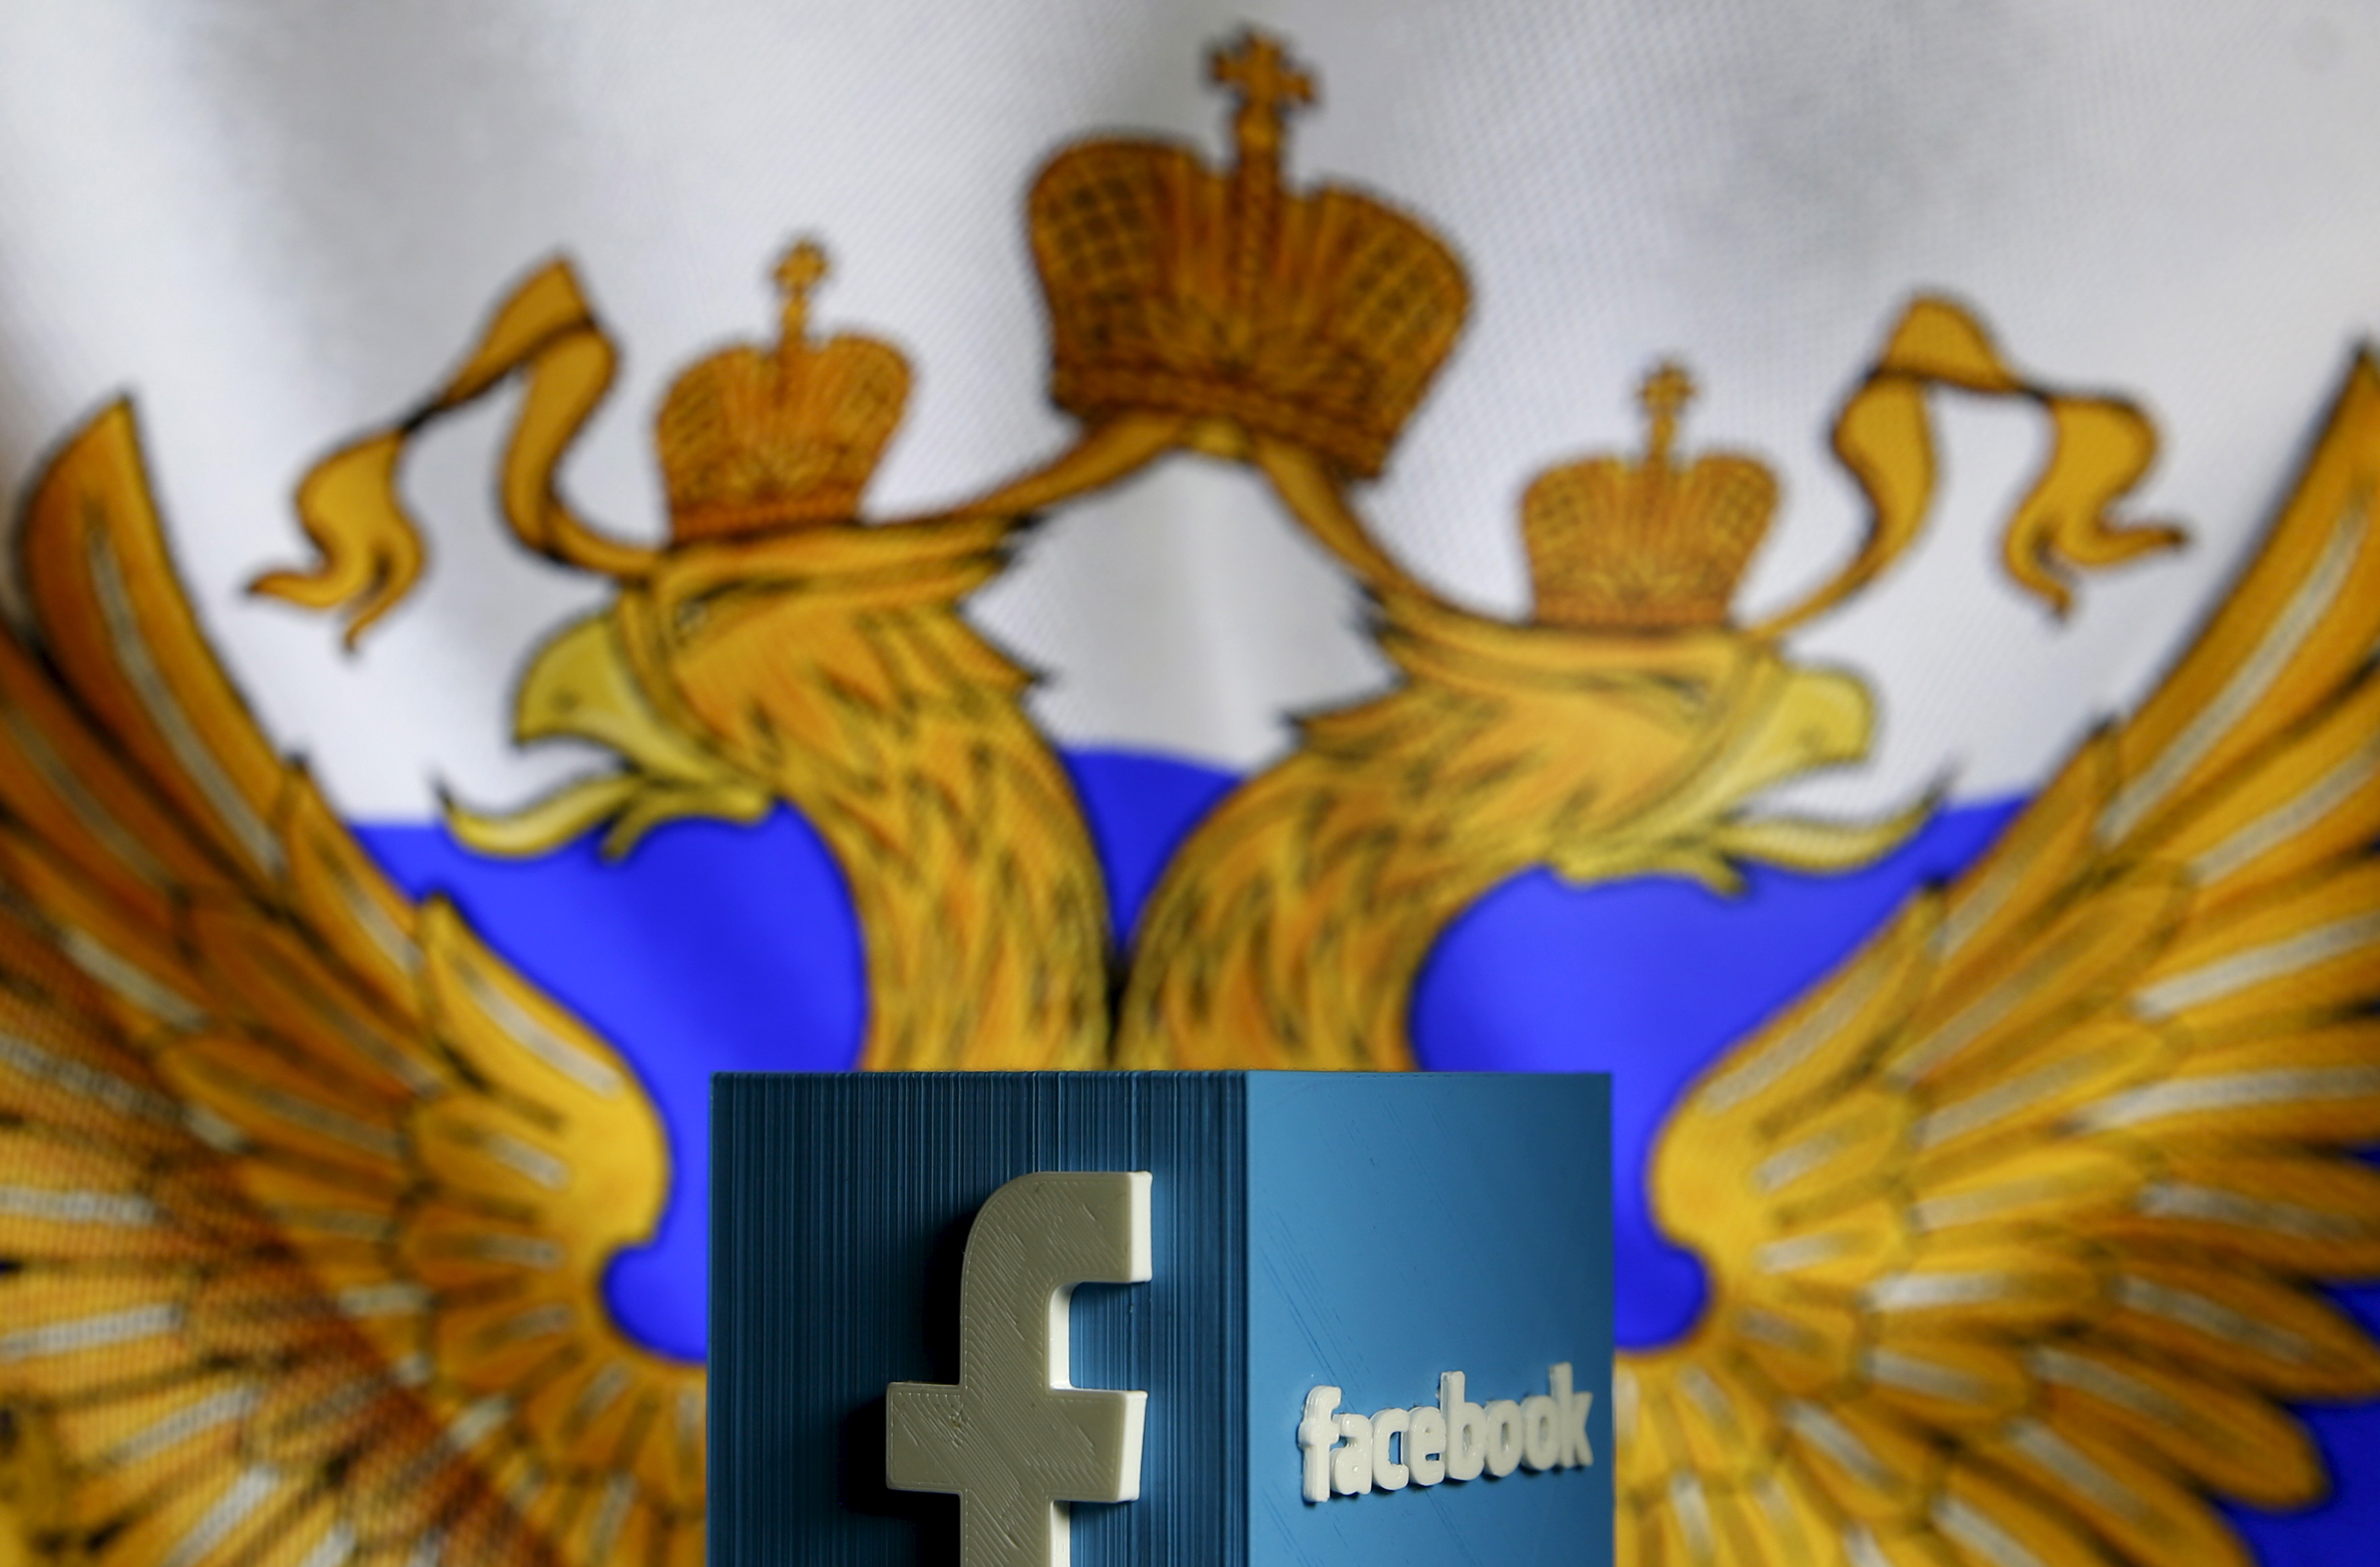 A 3D model of the Facebook logo is seen in front of a Russian flag in this photo illustration taken in Zenica